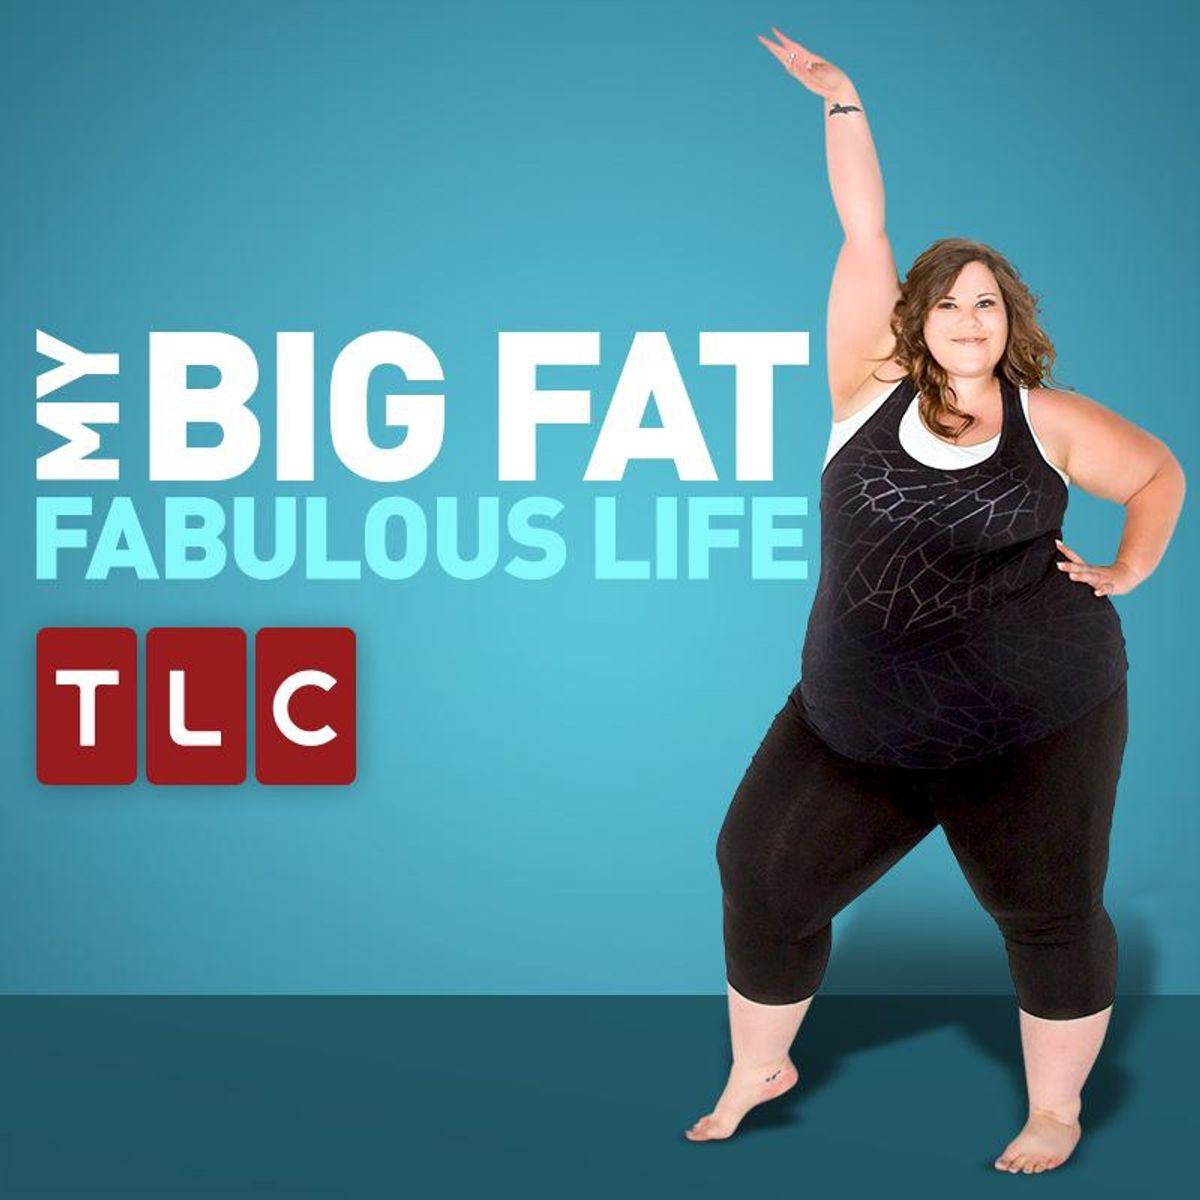 Big, Fat, And Fabulous: The No Body Shame Campaign